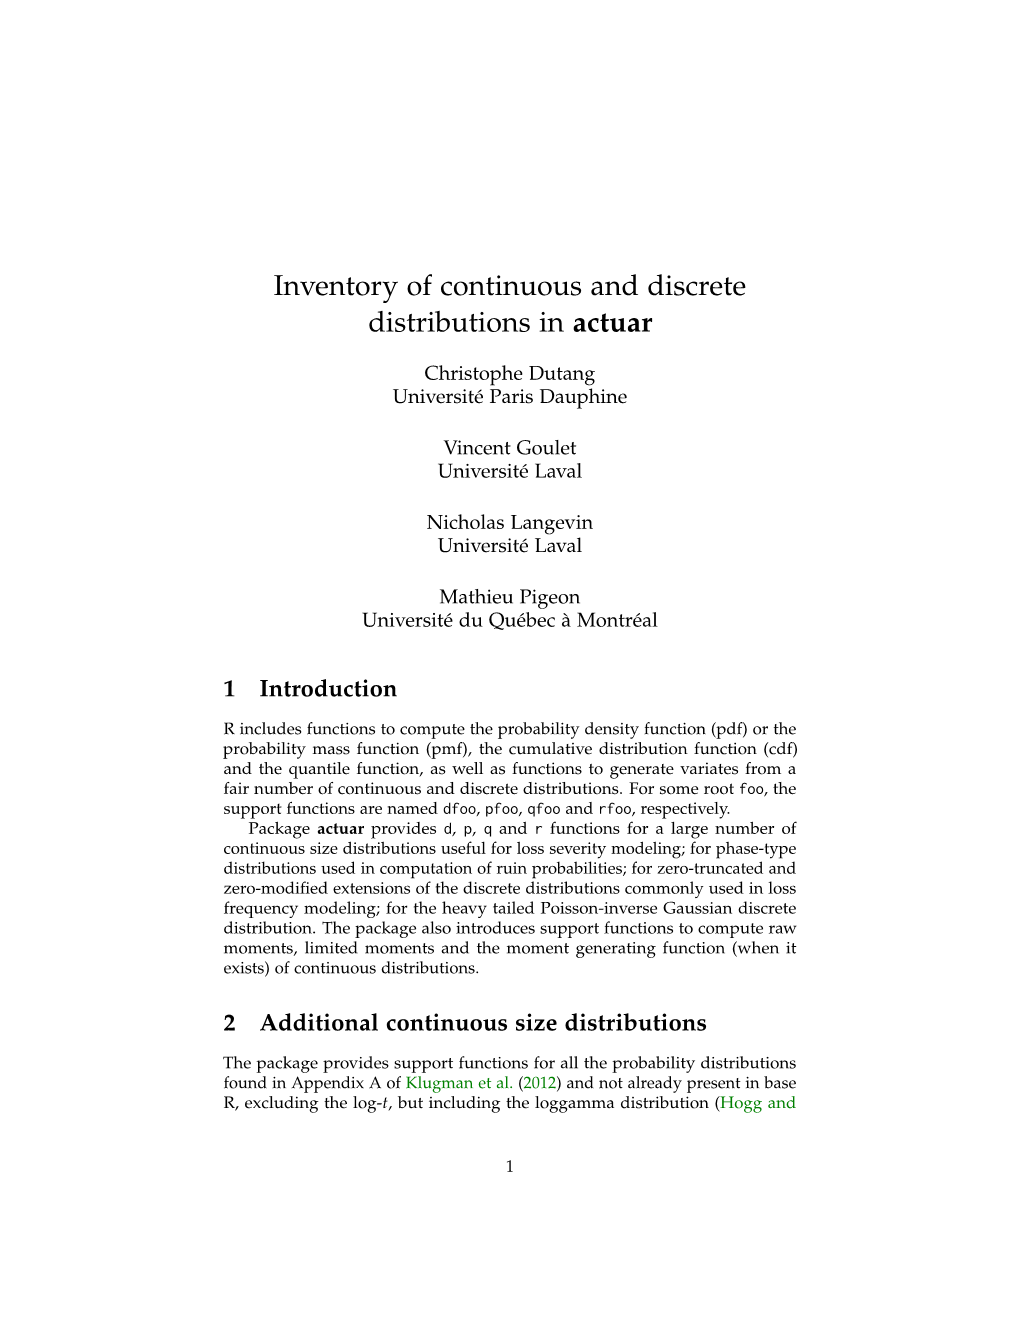 Inventory of Continuous and Discrete Distributions in Actuar